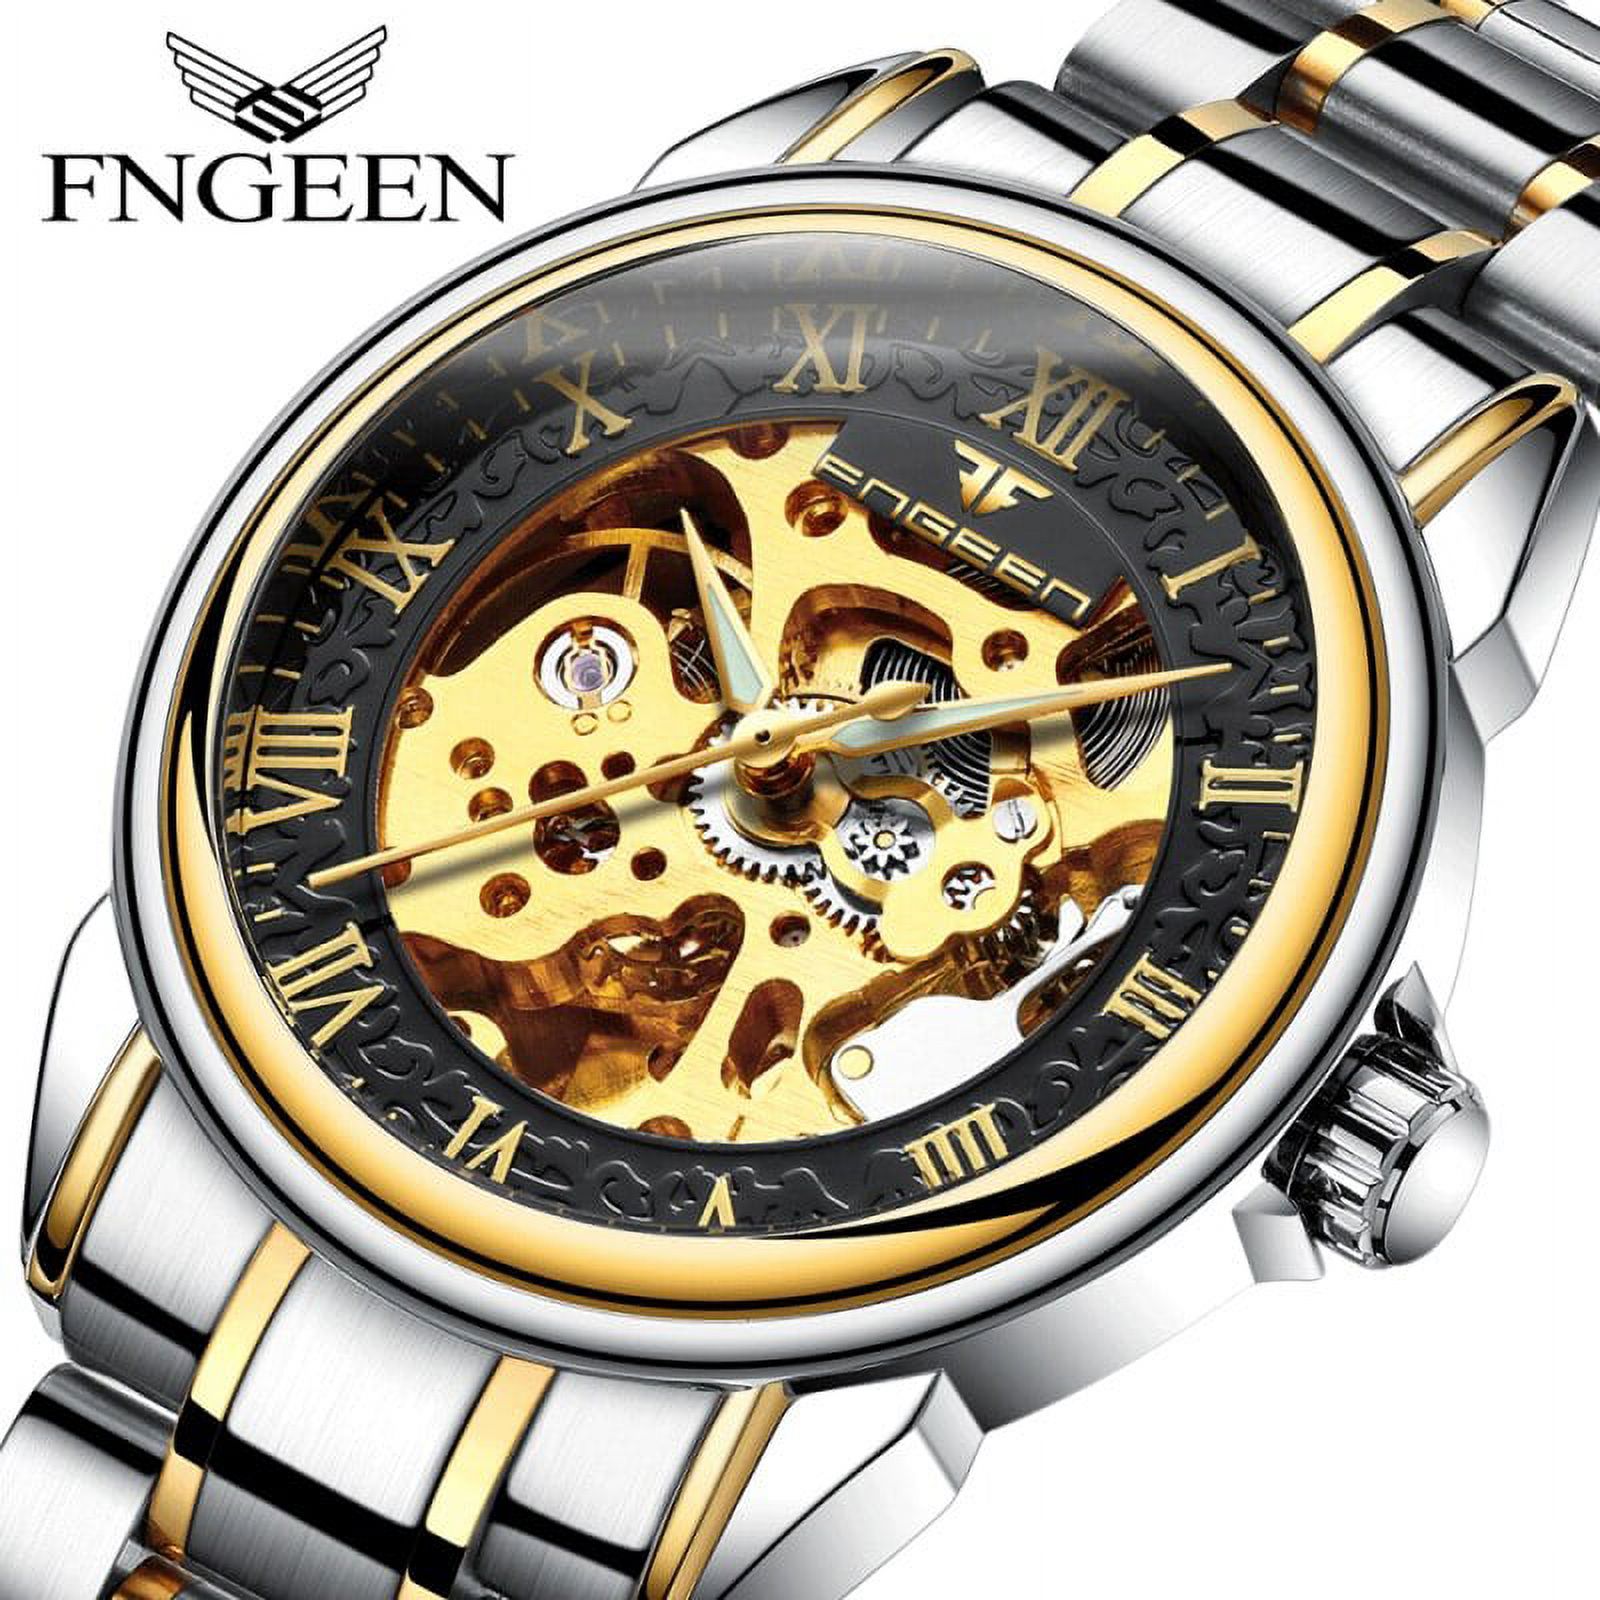 Fngeen Brand Men's Watch Waterproof Fashion Student Men's Watch Double-Sided Hollow Automatic Mechanical Watch - image 2 of 6